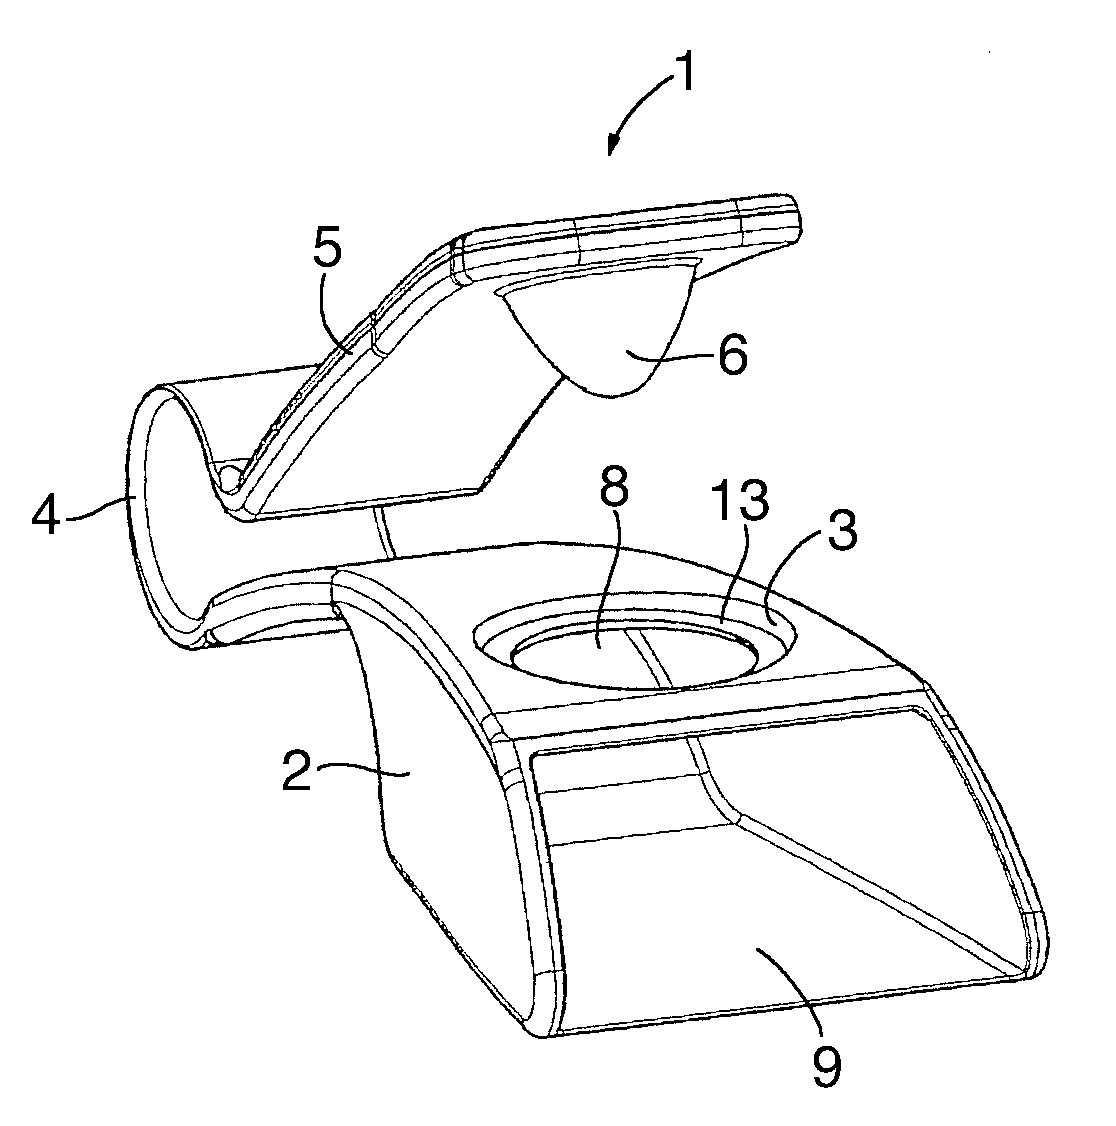 Device and method for separating contents and package of a capsule